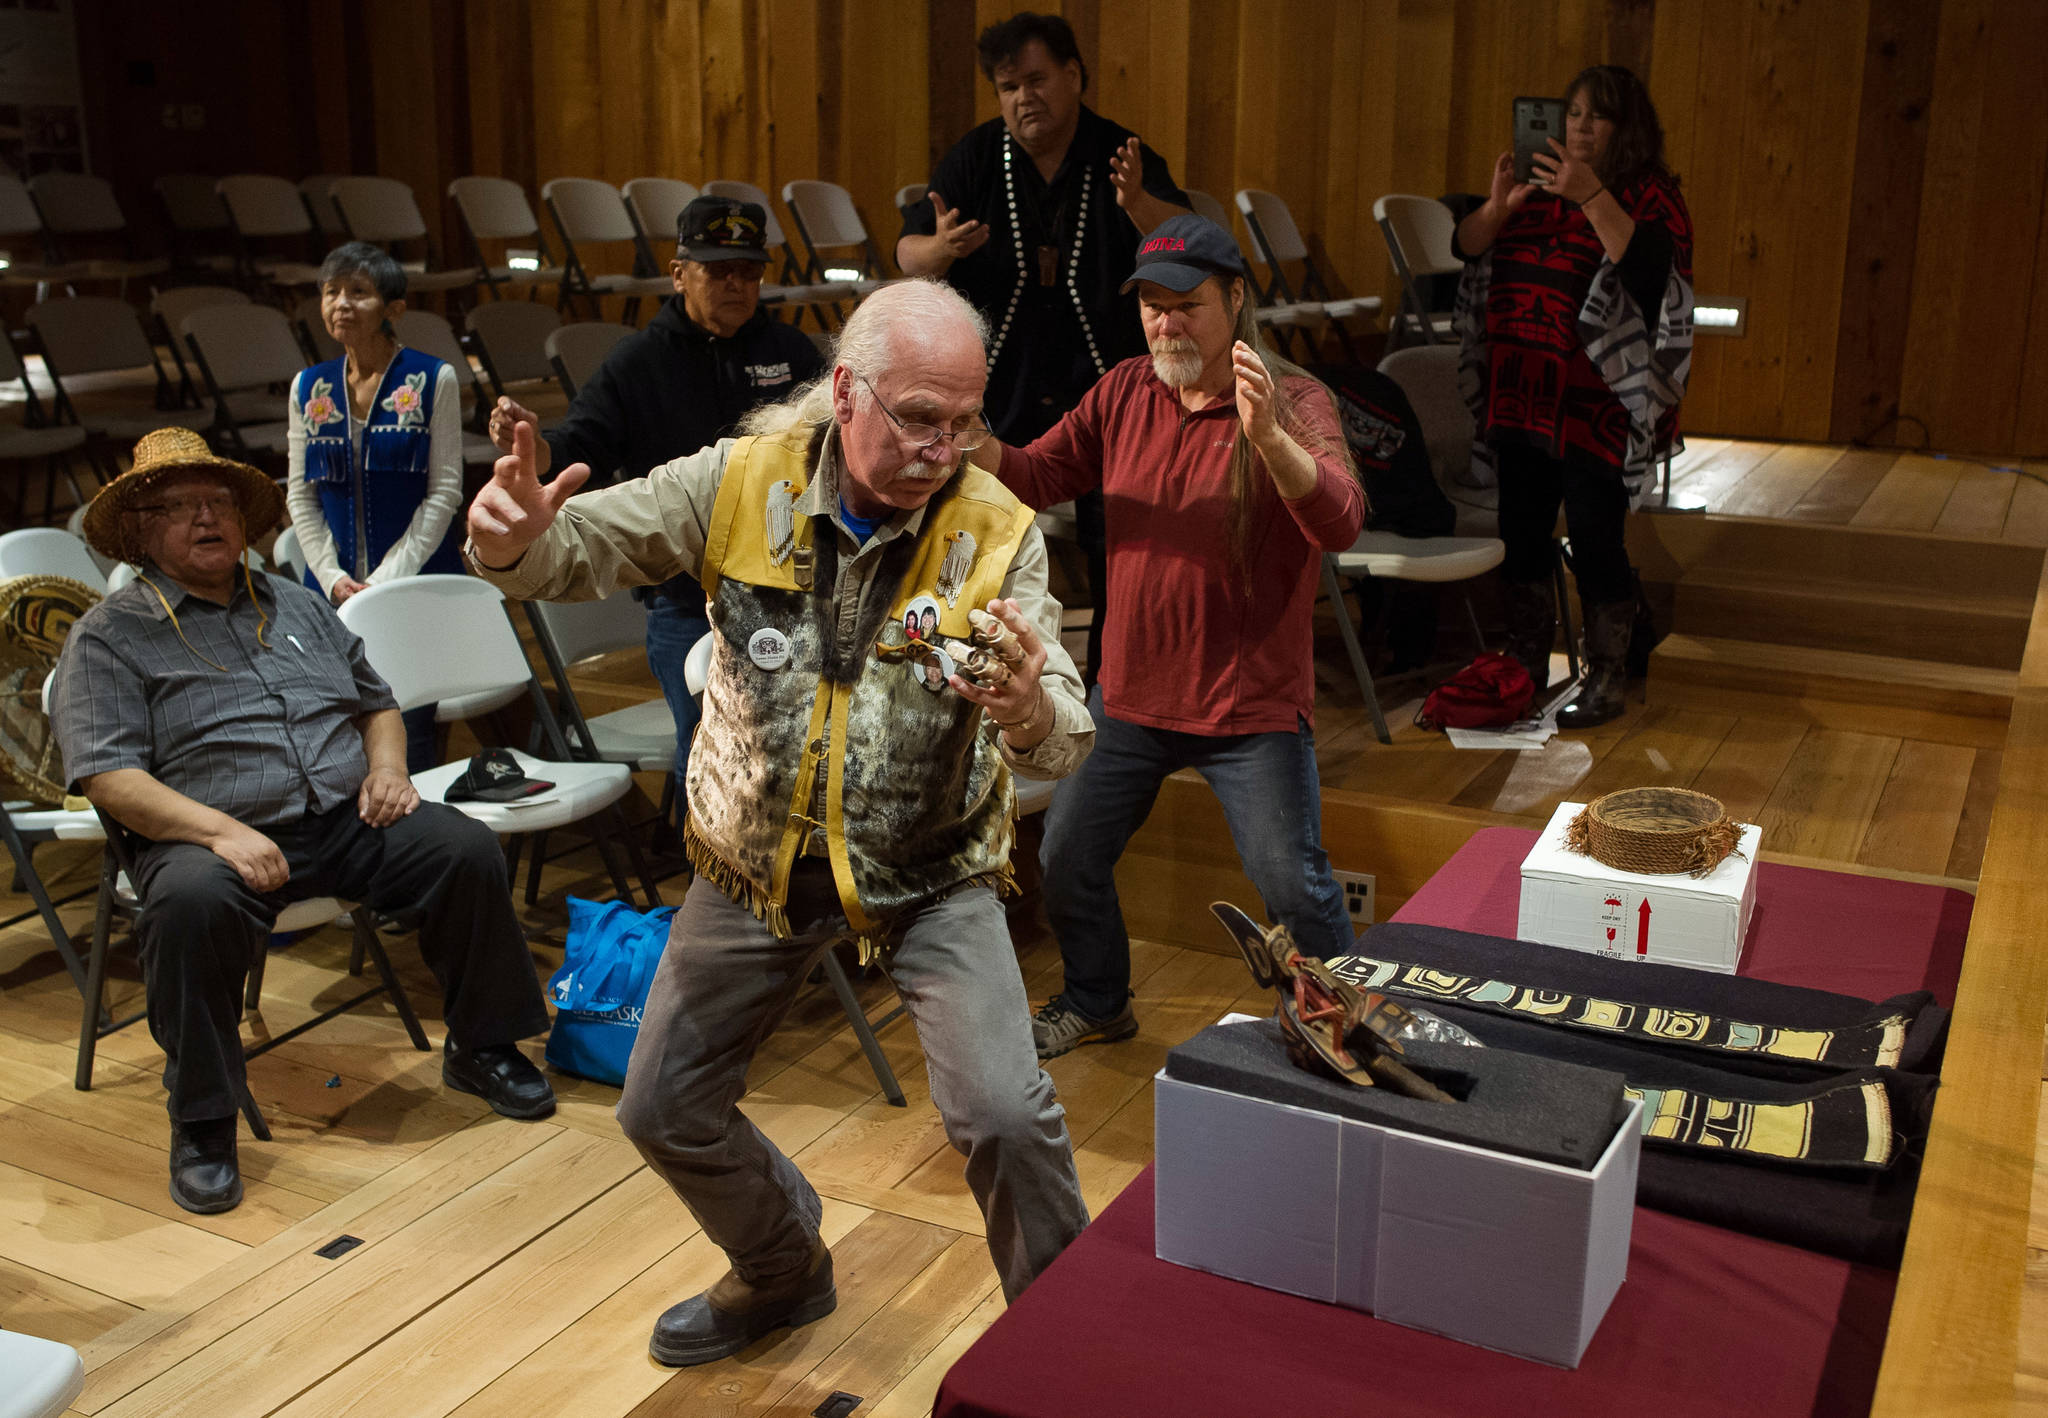 Gordon Greenwald, center, Fred Fulmer, right, and Alfie Price dance in honor of three items being transferred from the University of Pennsylvania back to a Hoonah clan during a repatriation ceremony at the Walter Soboleff Center on Wednesday, Oct. 11, 2017. (Michael Penn | Juneau Empire)